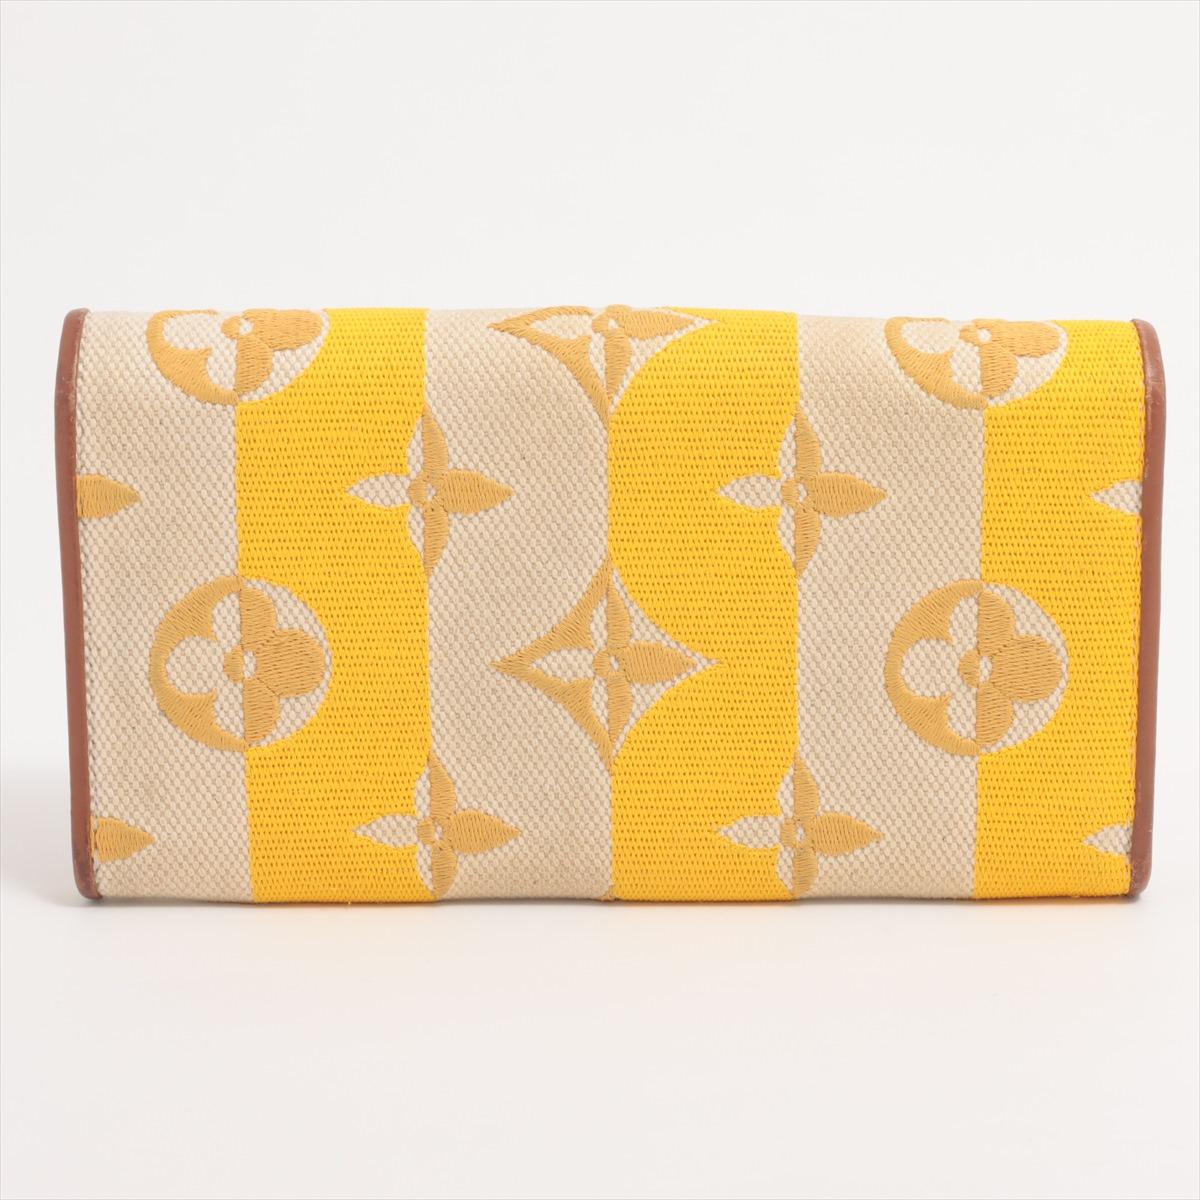 Louis Vuitton Monogram Canvas Capucine Wallet Stripe Yellow Beige In Good Condition For Sale In Indianapolis, IN